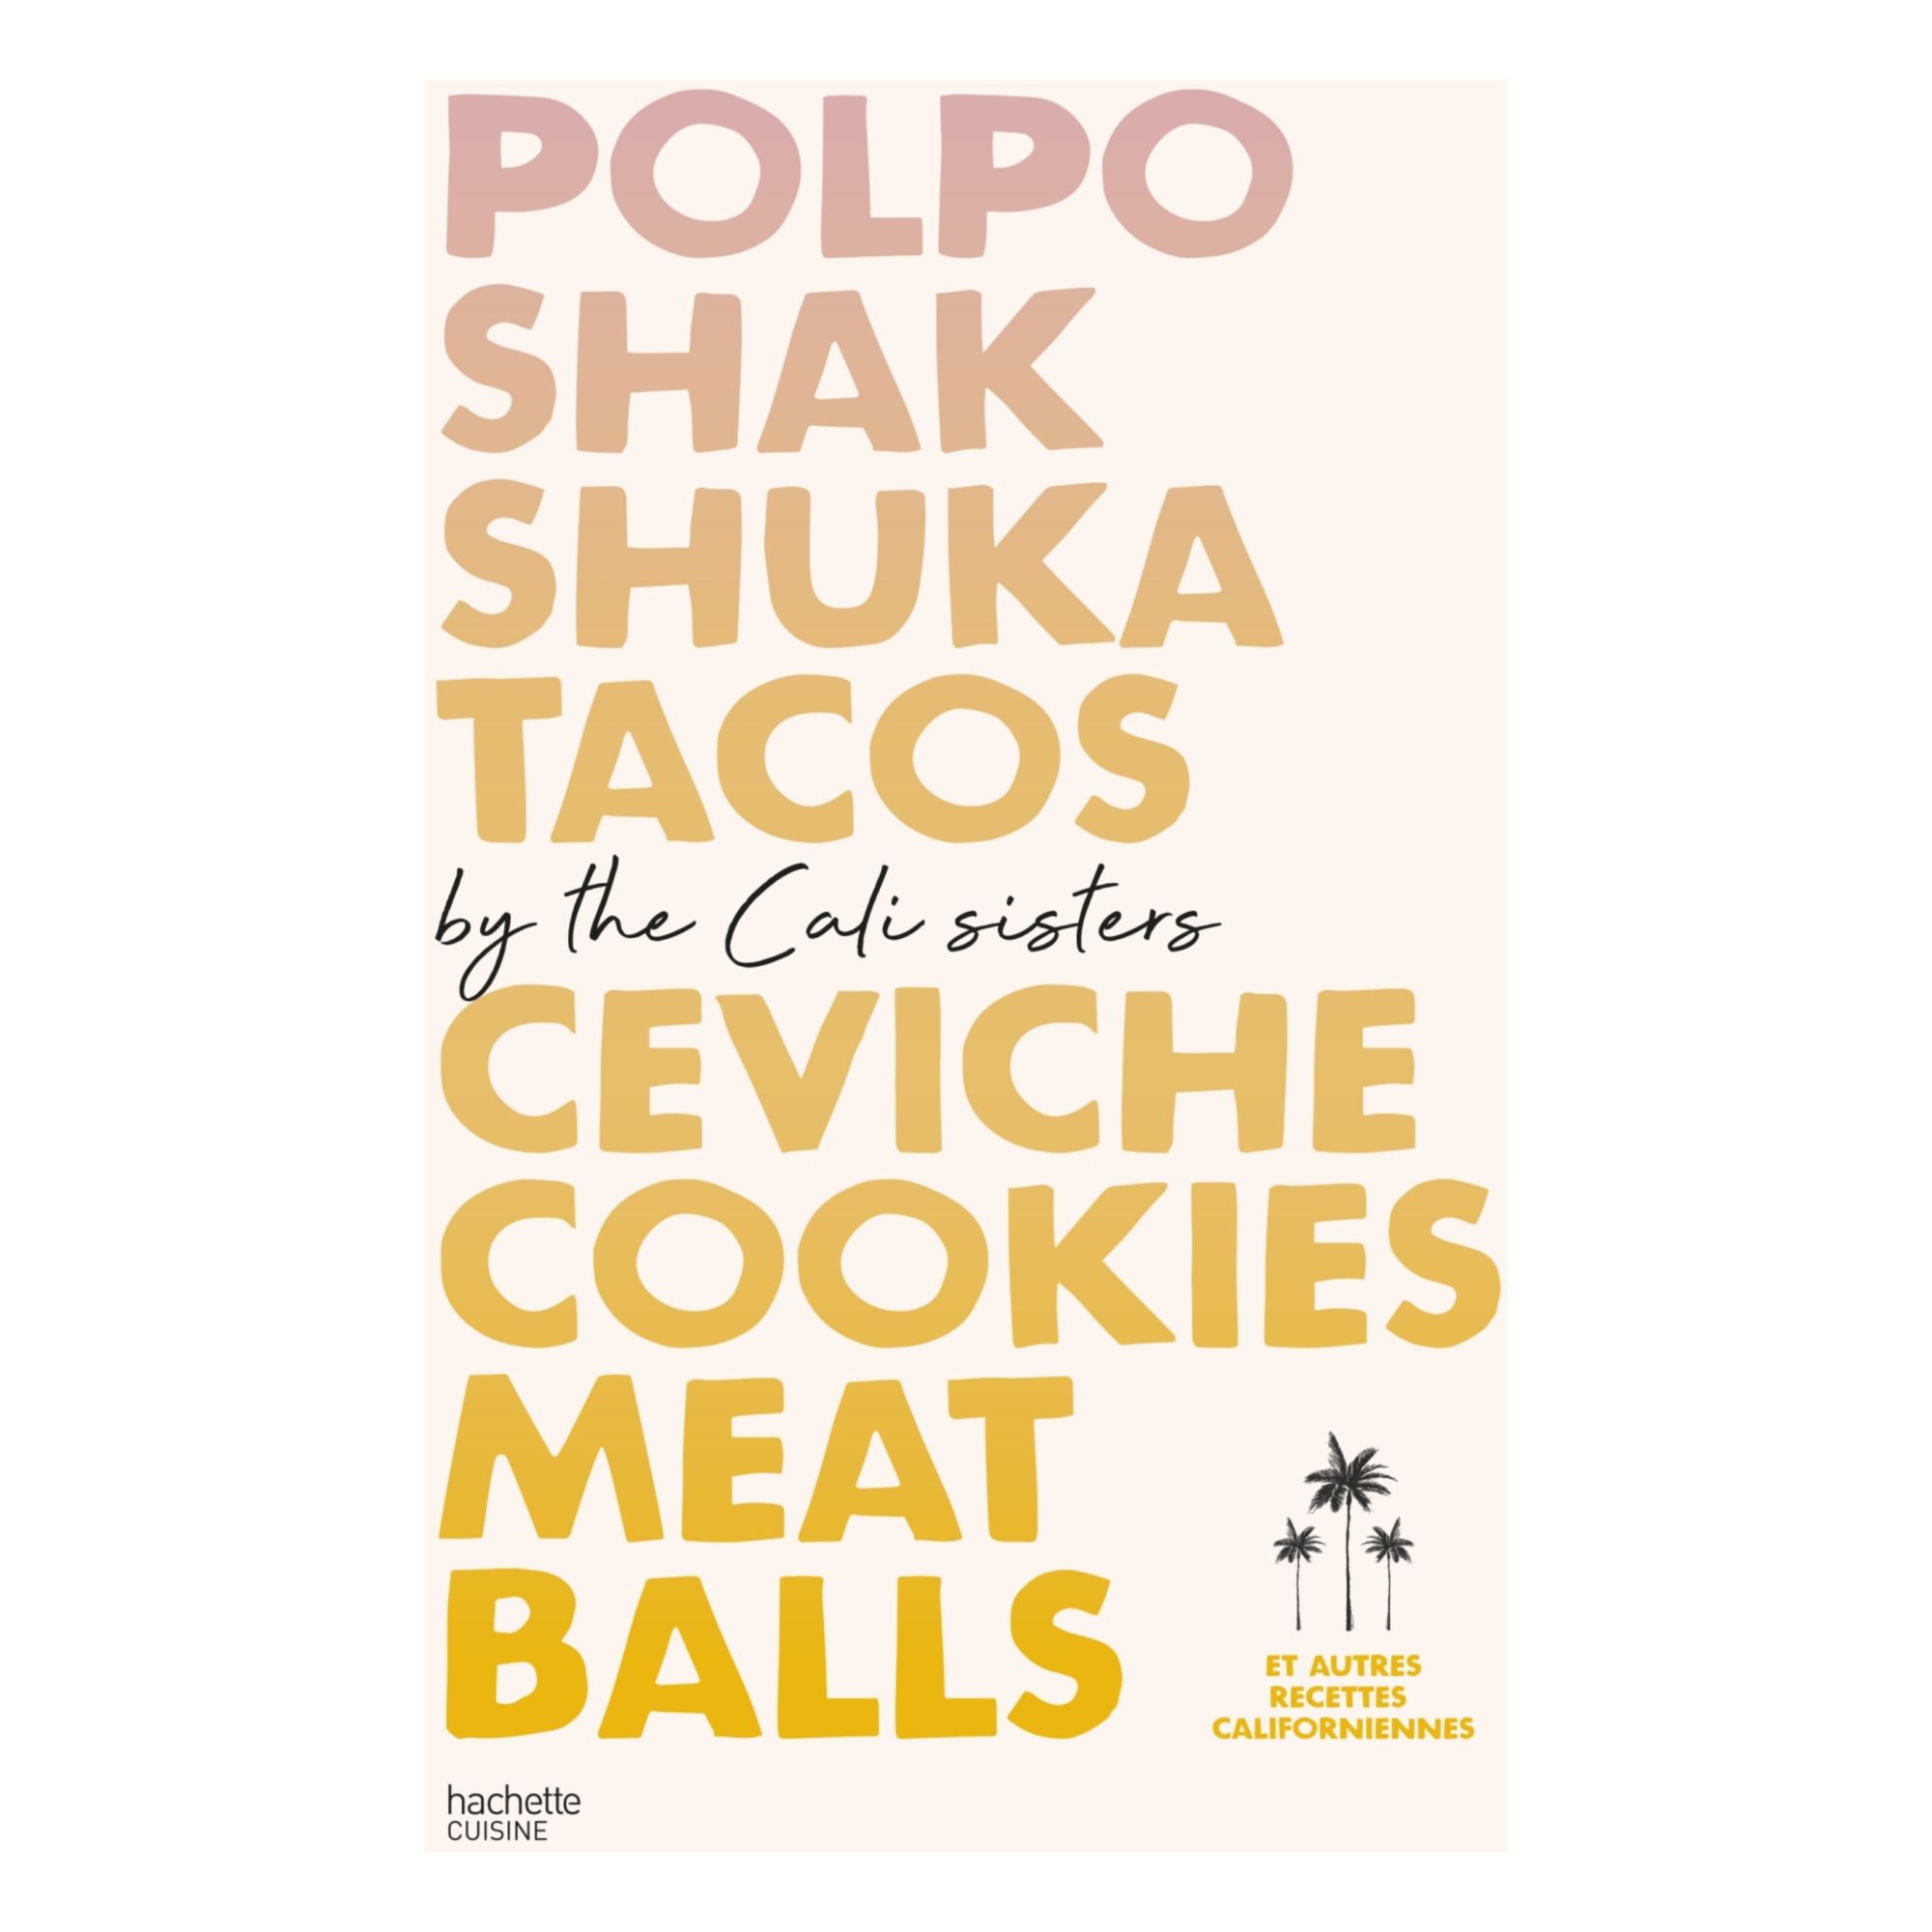 Polpo, Shakshuka, Tacos, Ceviche, Cookies, Meat Balls by Cali Sisters